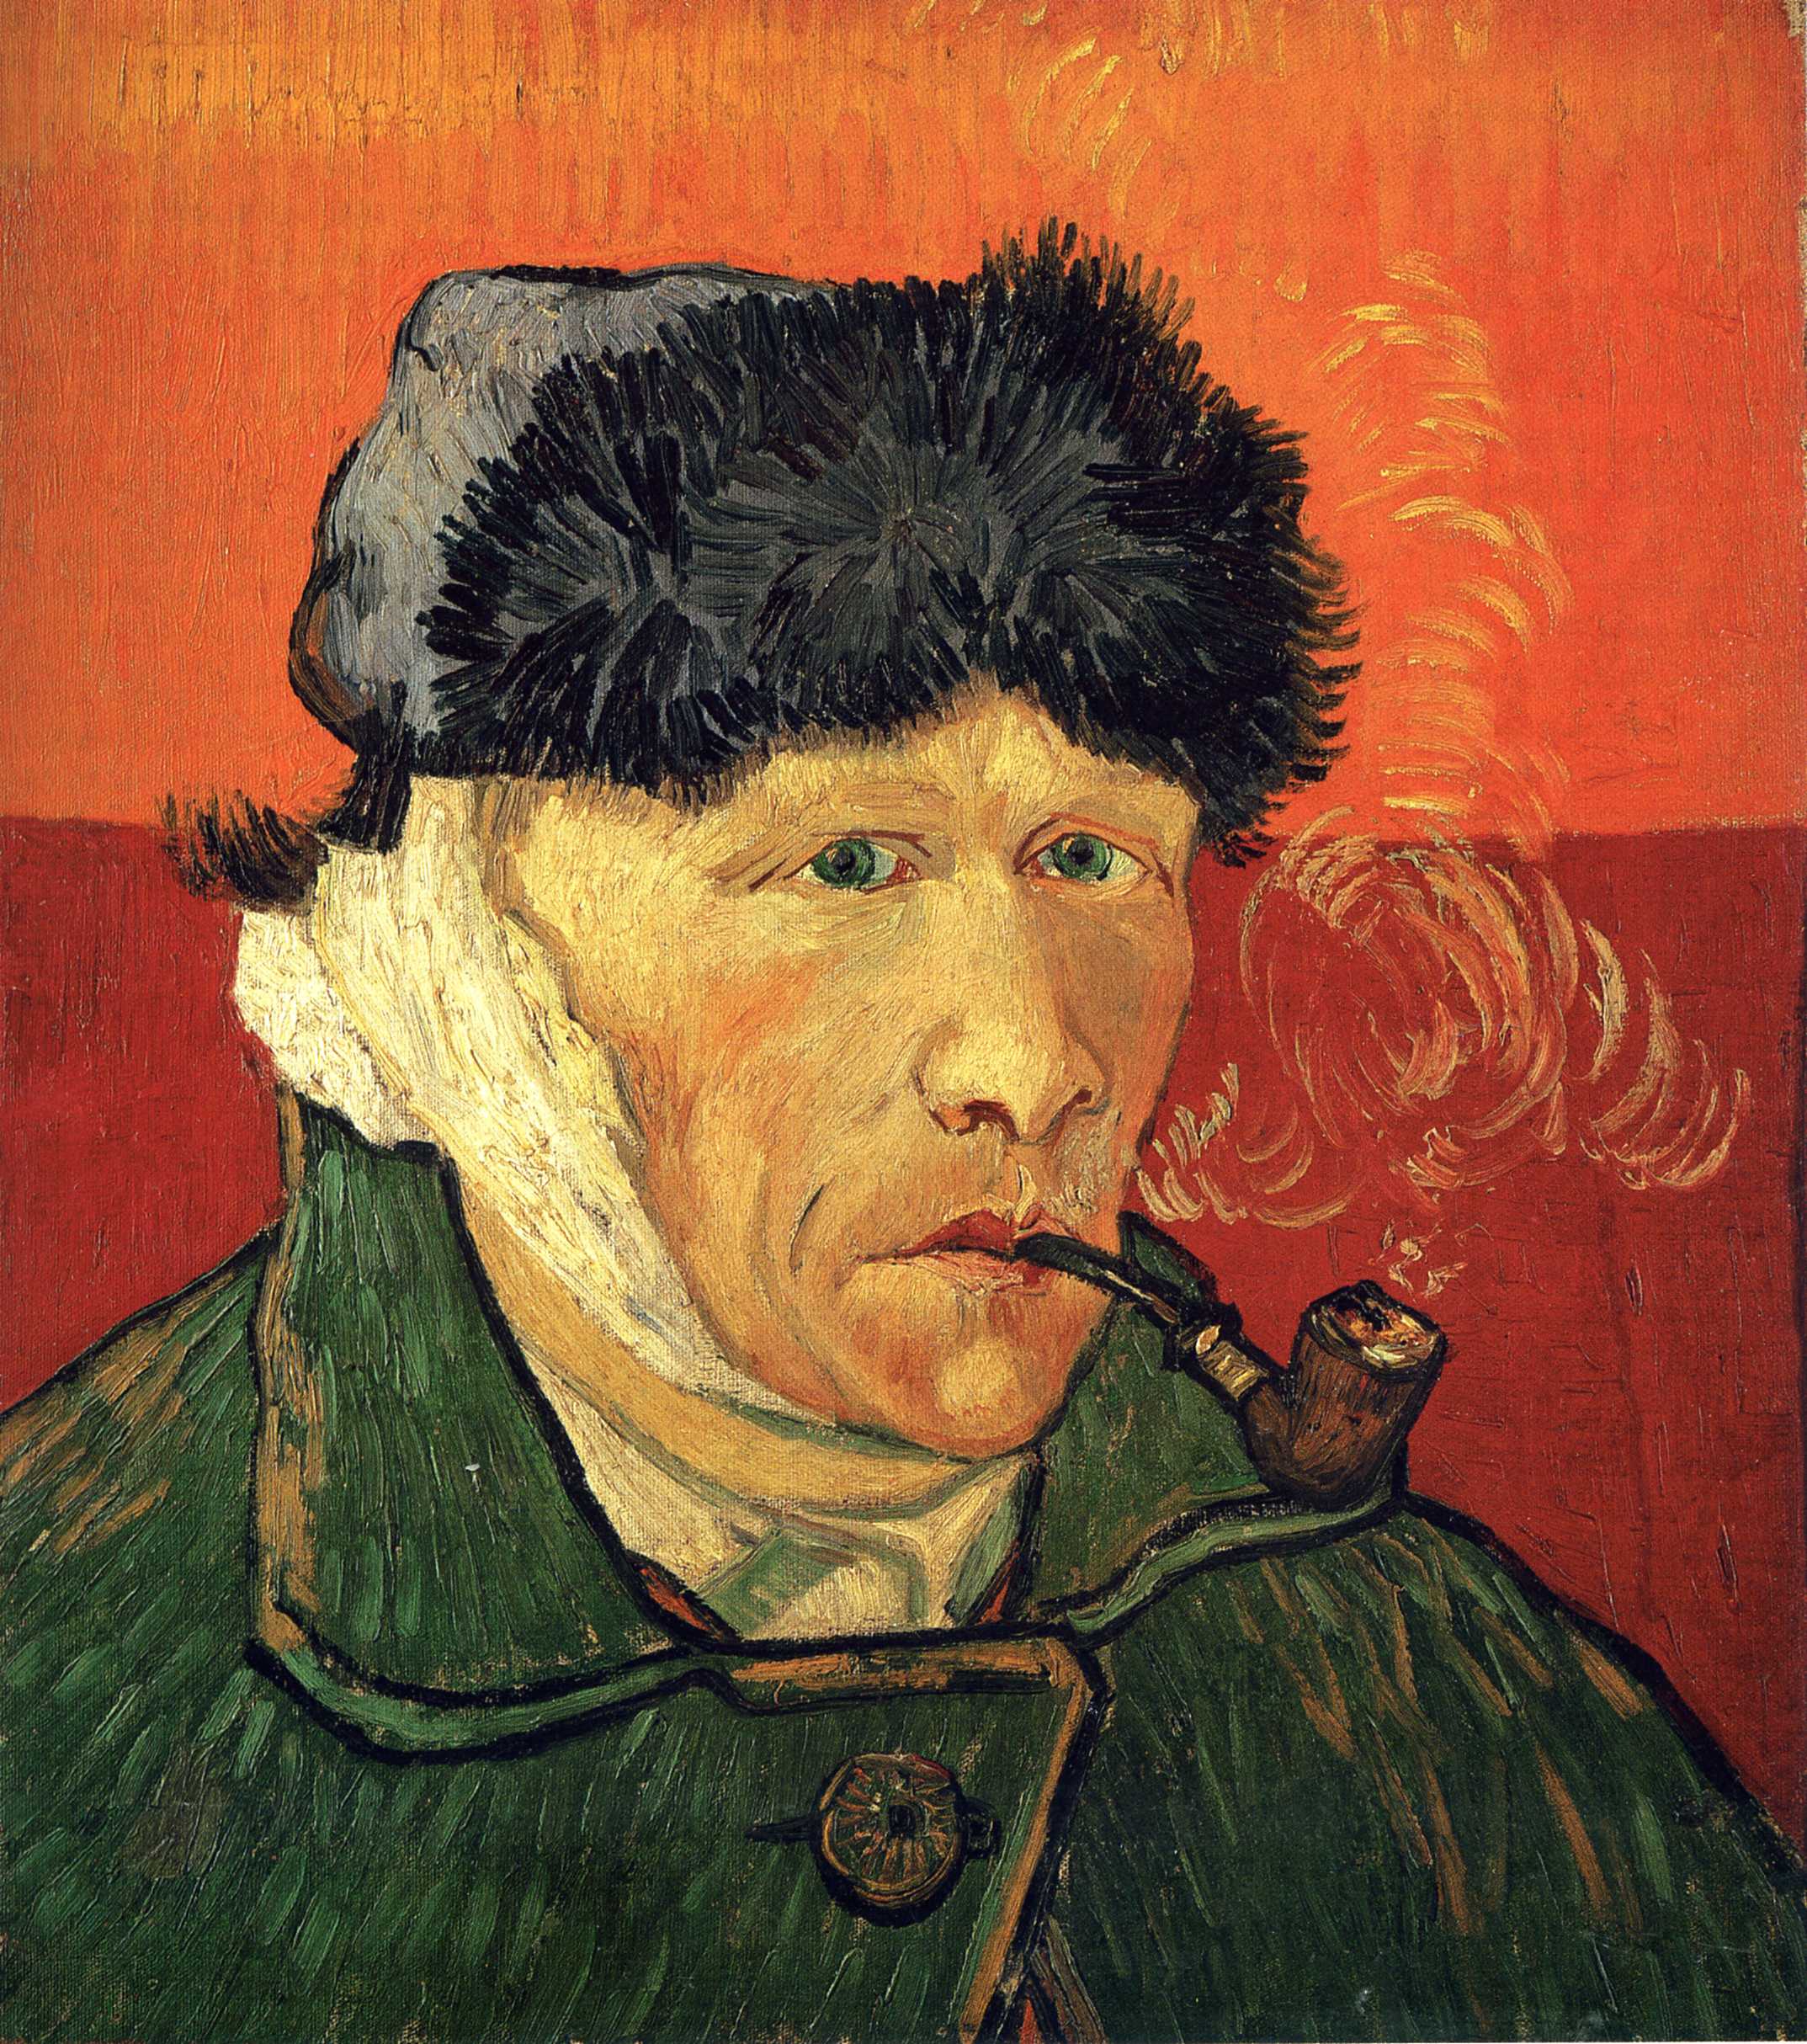 Self-portrait with Bandaged Ear and Pipe by Vincent van Gogh - 1889 - 51 cm x 45 cm private collection